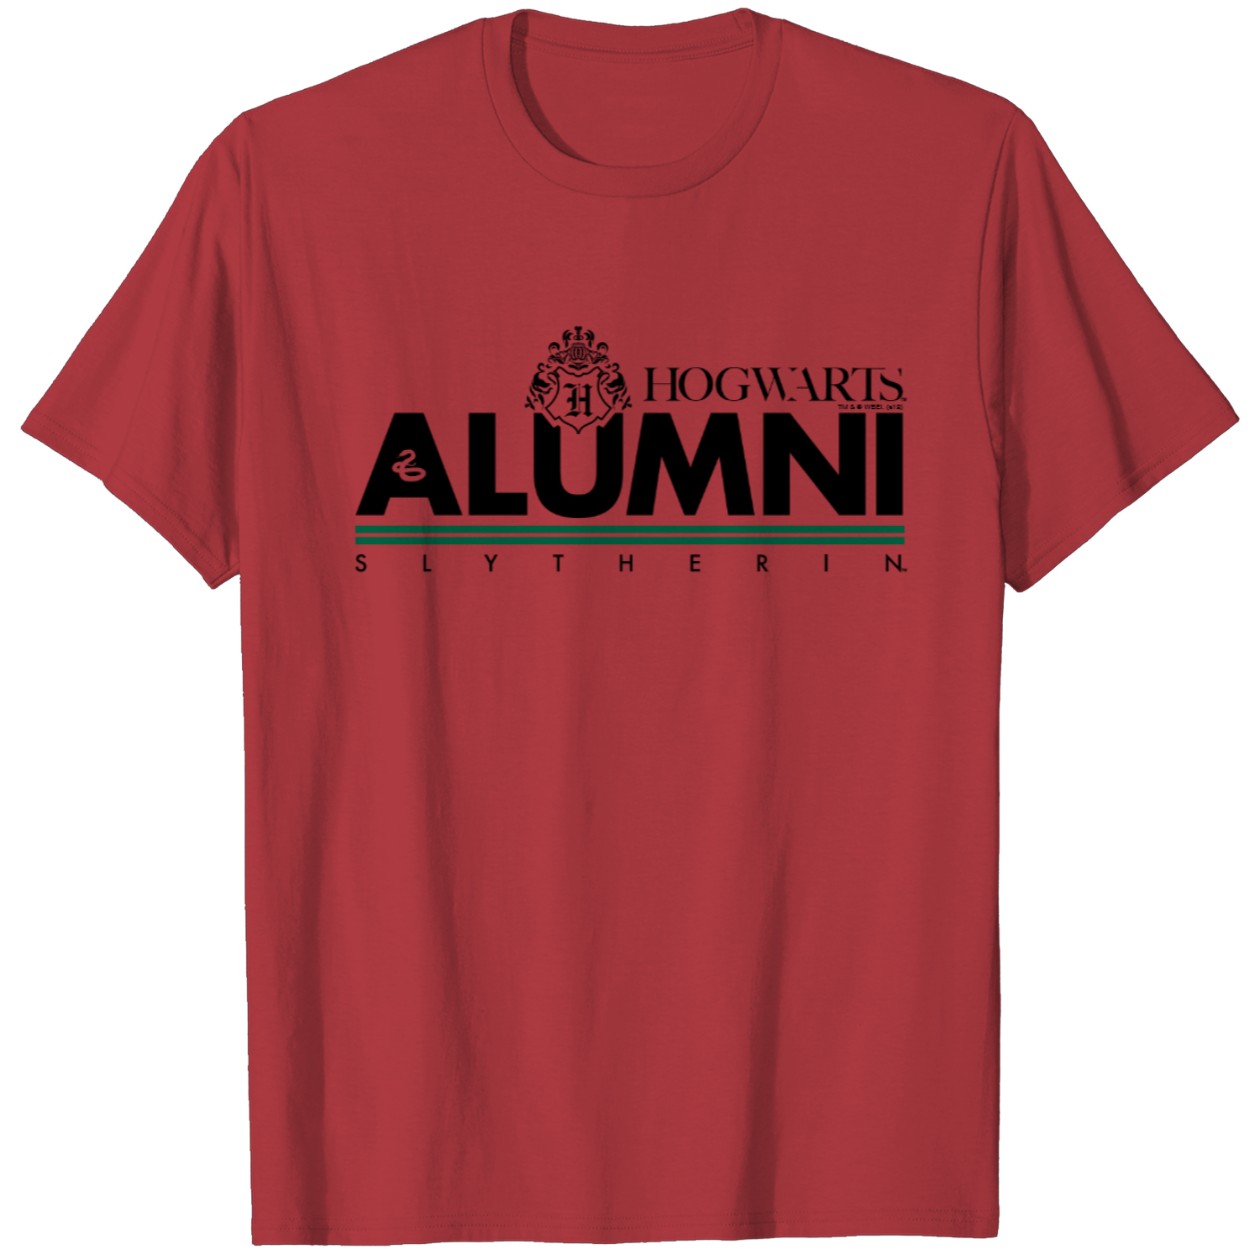 Show Off Your Slytherin Pride with Hogwarts Alumni T-Shirt IYT